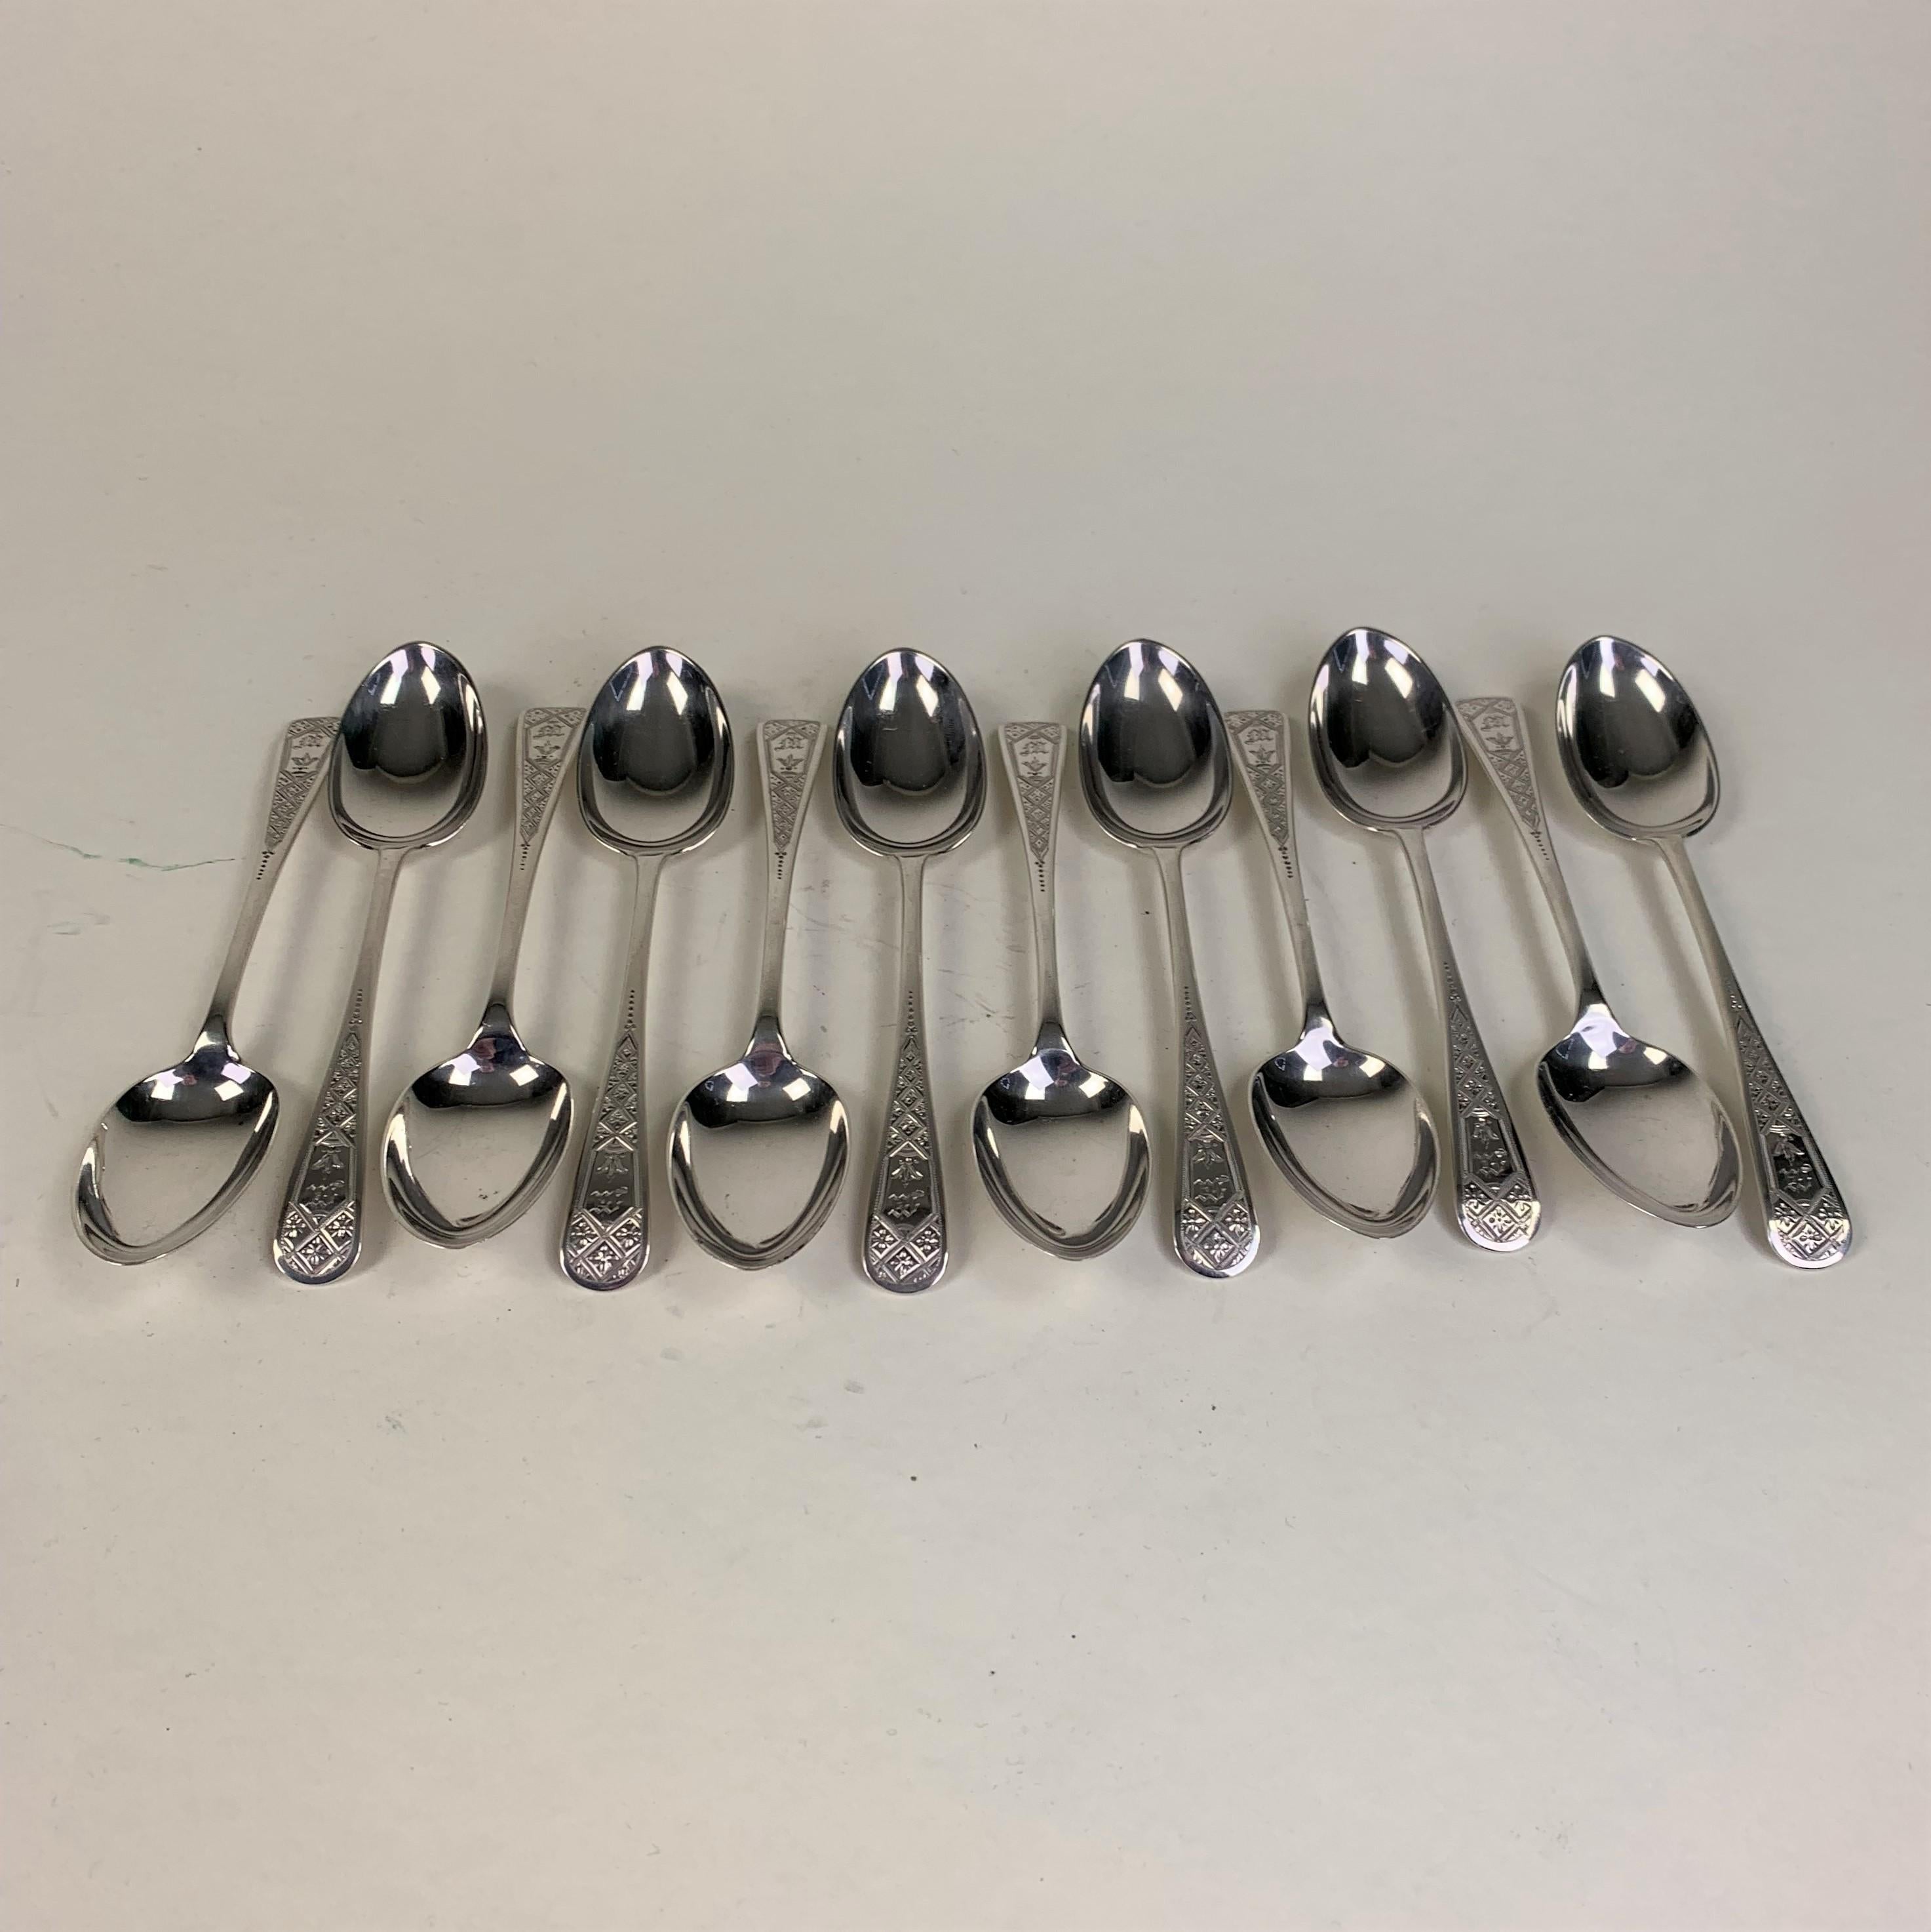 Set of twelve bright-cut silver teaspoons by Josiah Williams & Co. (George Maudsley Jackson), London 1892. All in excellent condition with almost no wear or damage.
Each engraved with the letter 'M'.
Total weight 266 grams. Each spoon is 14cms